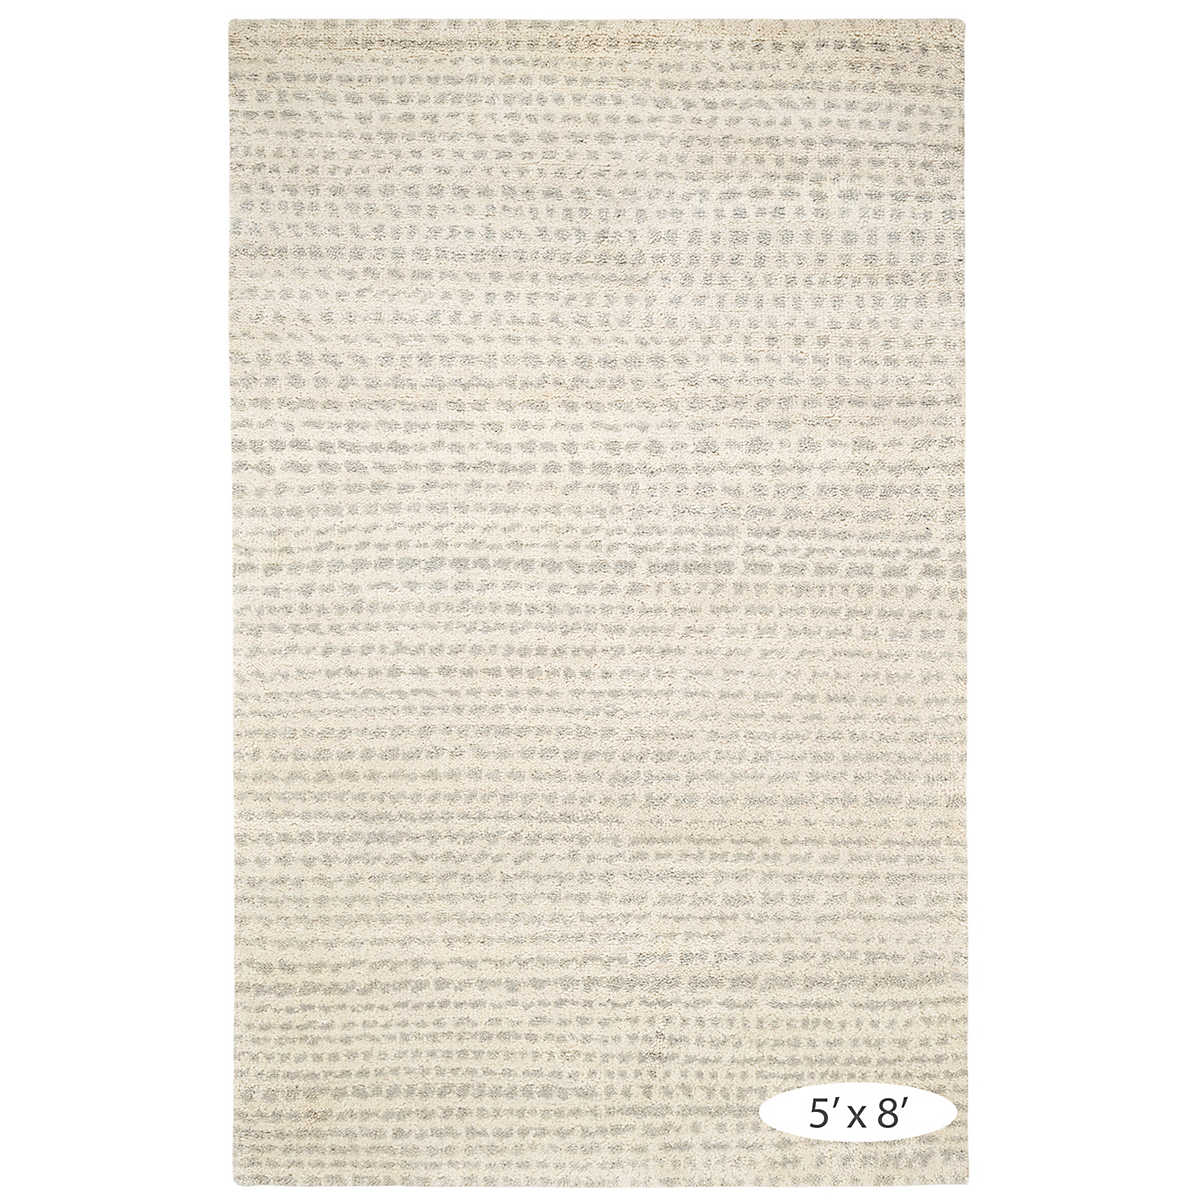 The Shepherd Plaster Rug deeply dense and cushy pile serves to highlight the beauty of the unbleached color variations of natural wool fleece. The random stippling of irregularly shaped splotches is a signature motif of Marie Flanigan, an award-winning interior designer. Amethyst Home provides interior design services, furniture, rugs, and lighting in the Miami metro area.